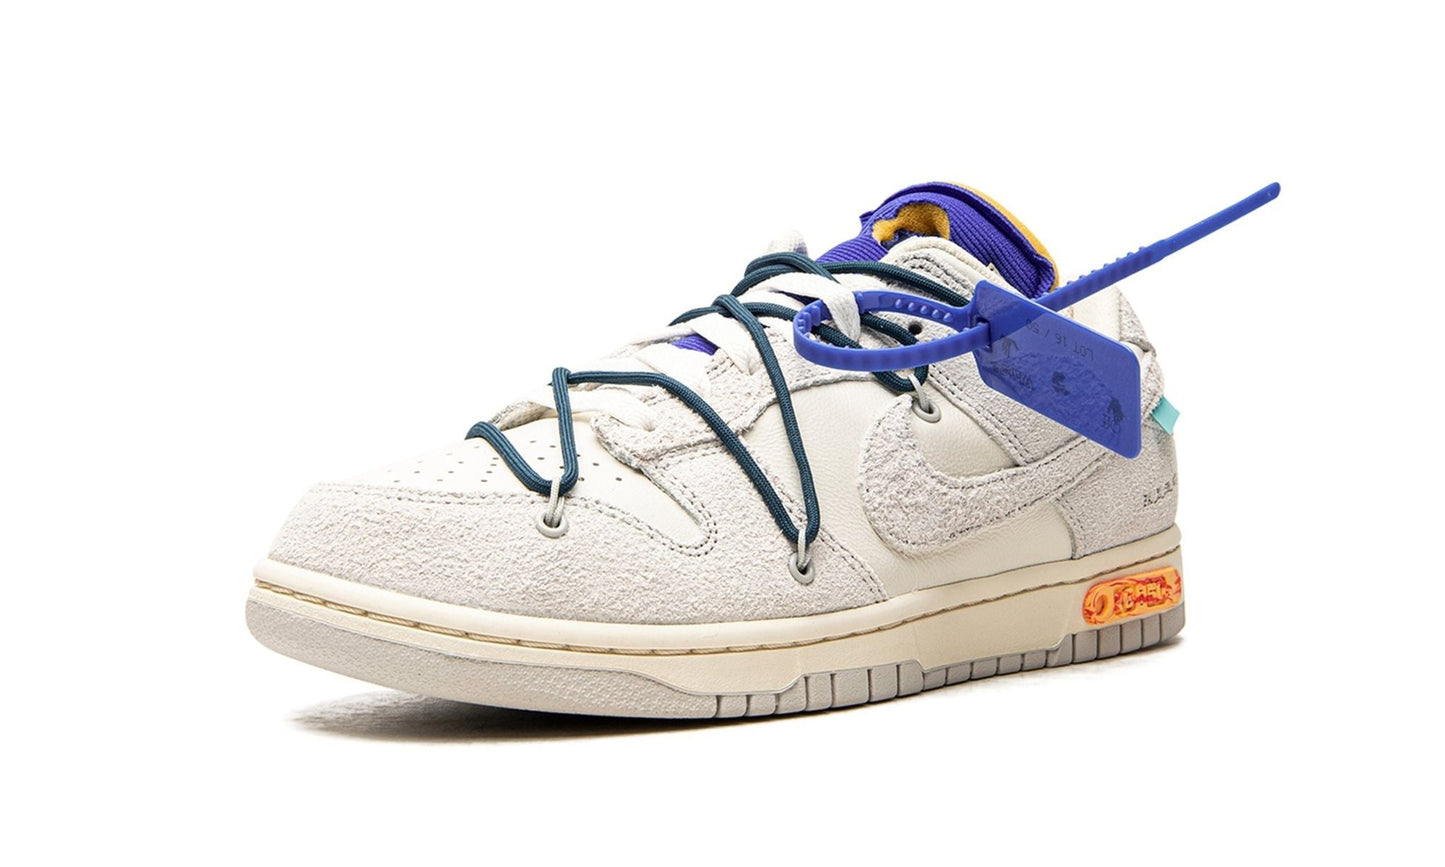 NIKE X OFF-WHITE DUNK LOW "Off-White - Lot 16"